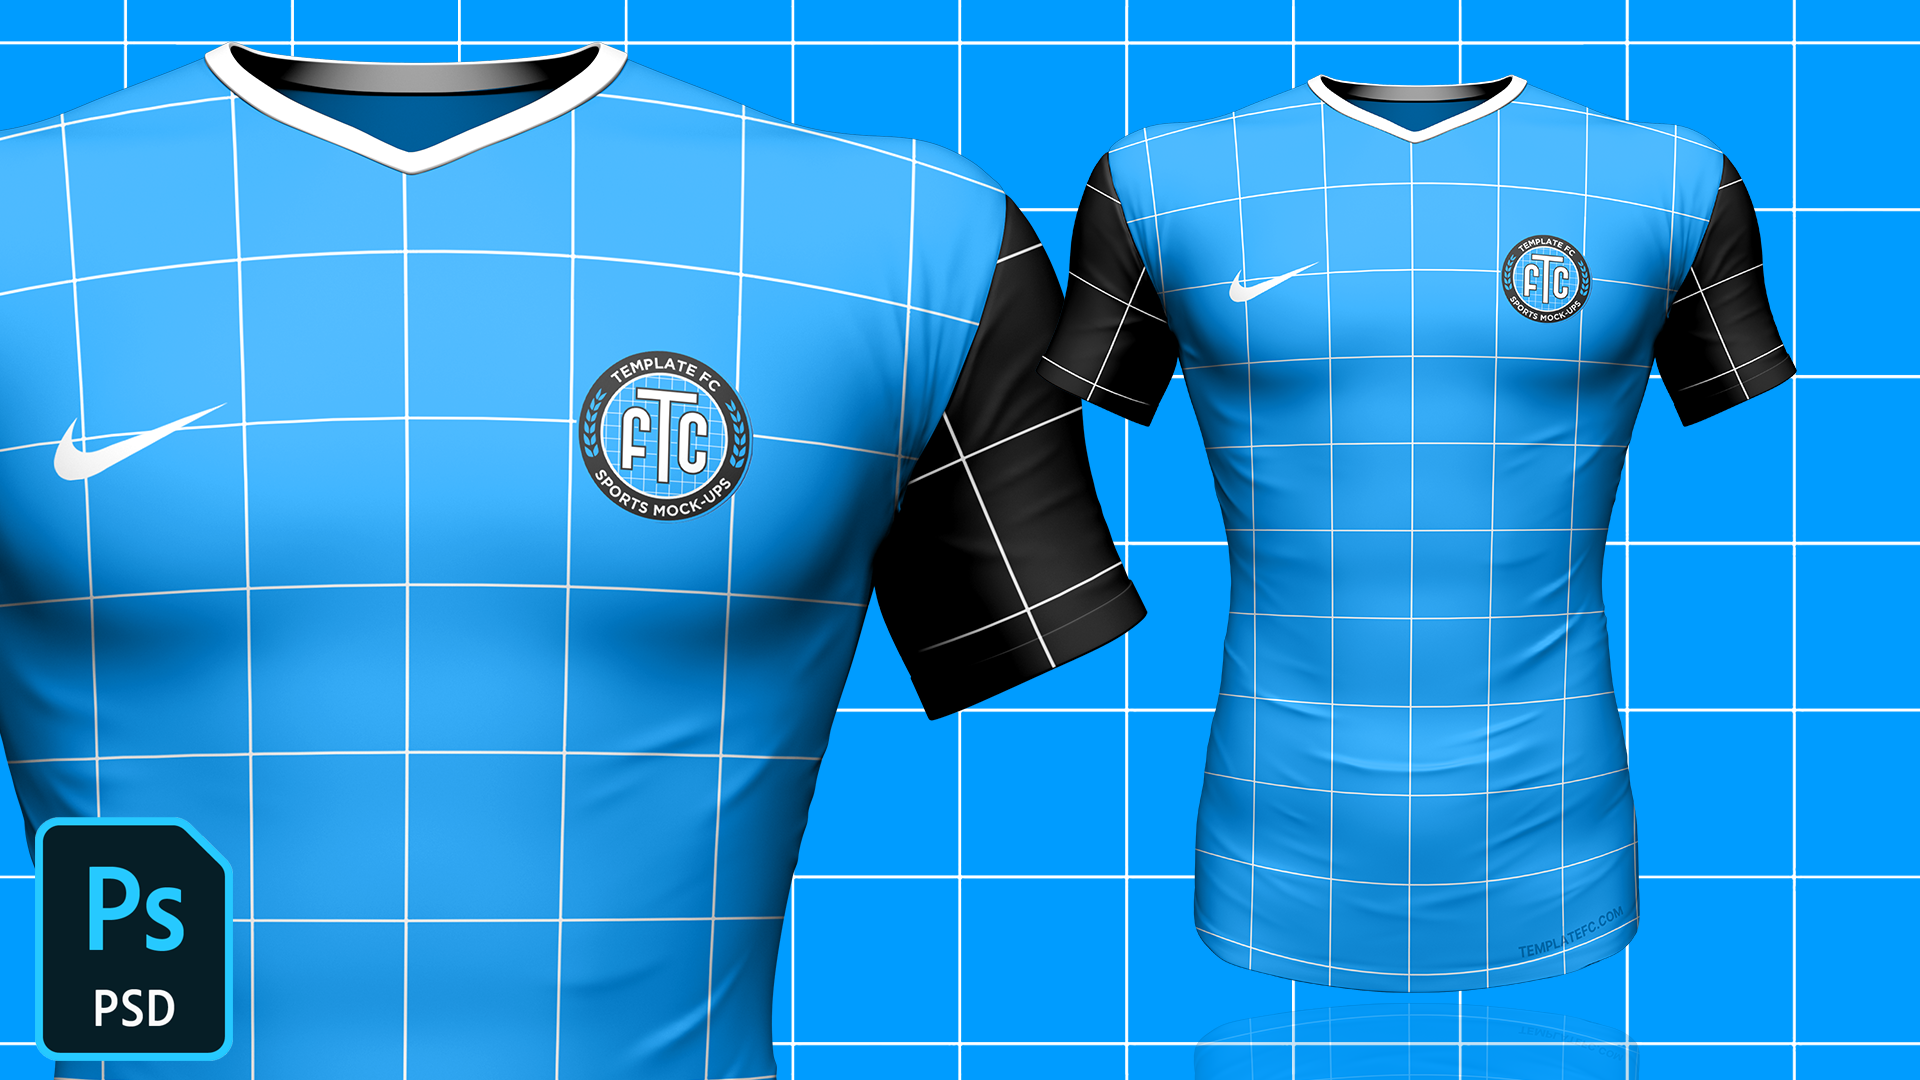 Free Download Football Kit Template Psd